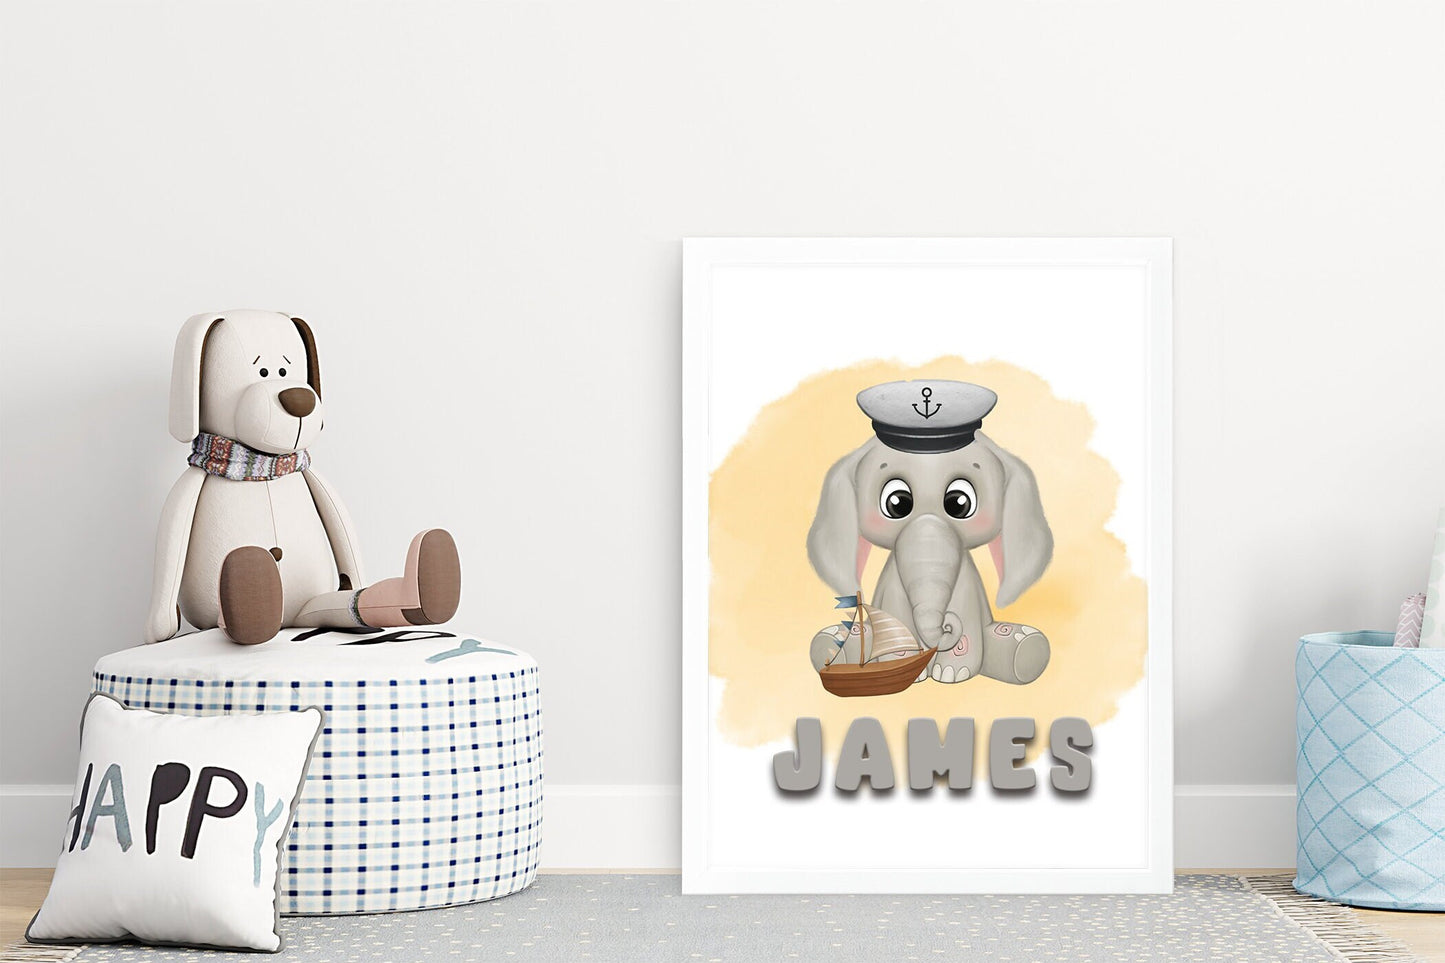 Elephant nursery pictures, cute baby animal artwork - personalise with any message | Be kind | born on dates | names